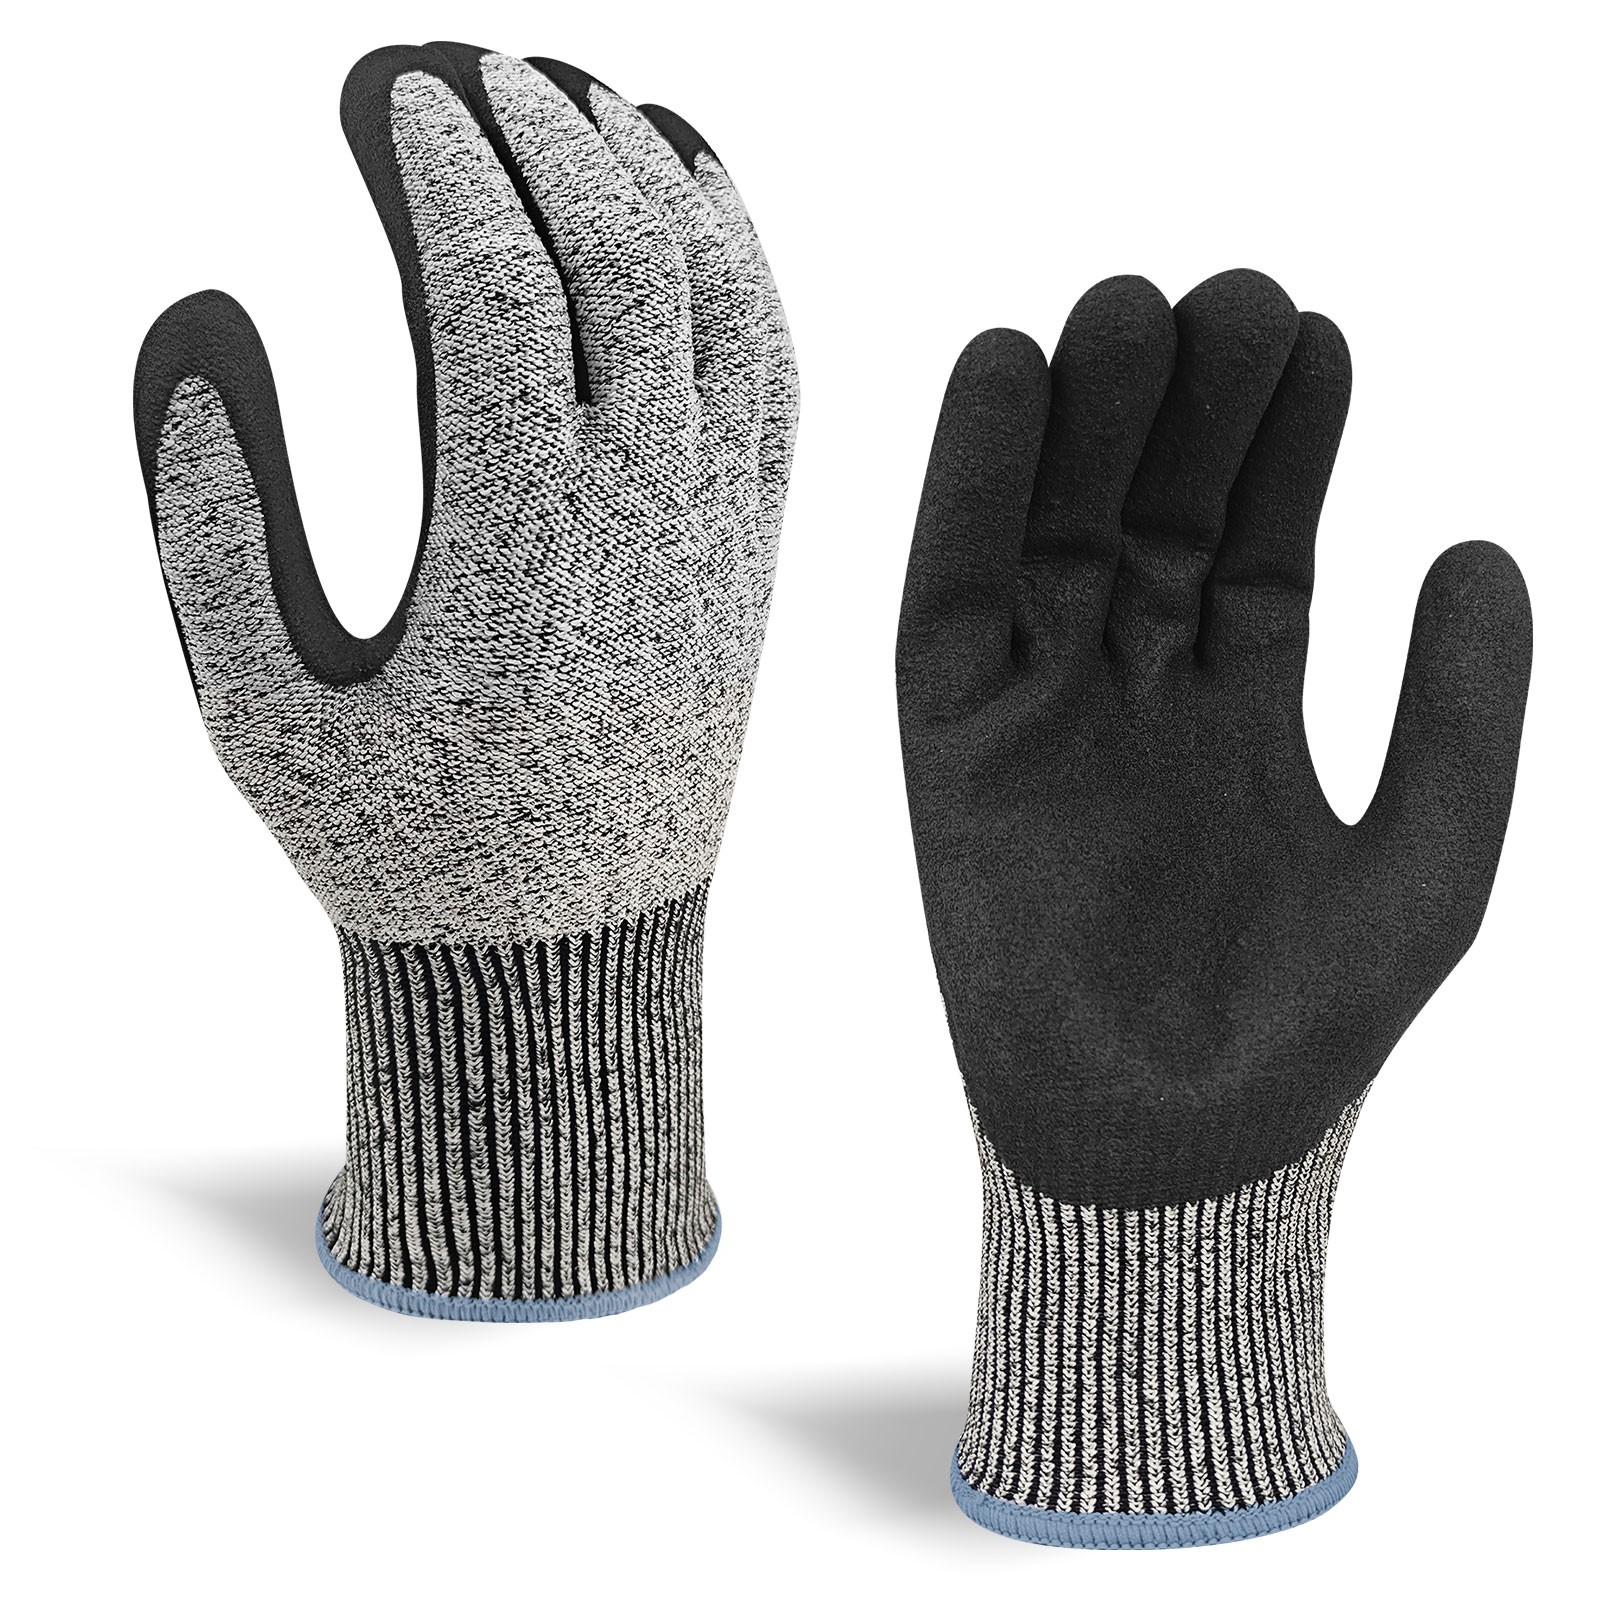 13G Nitrile Dipped A4 Cut Resistant Glove /60380